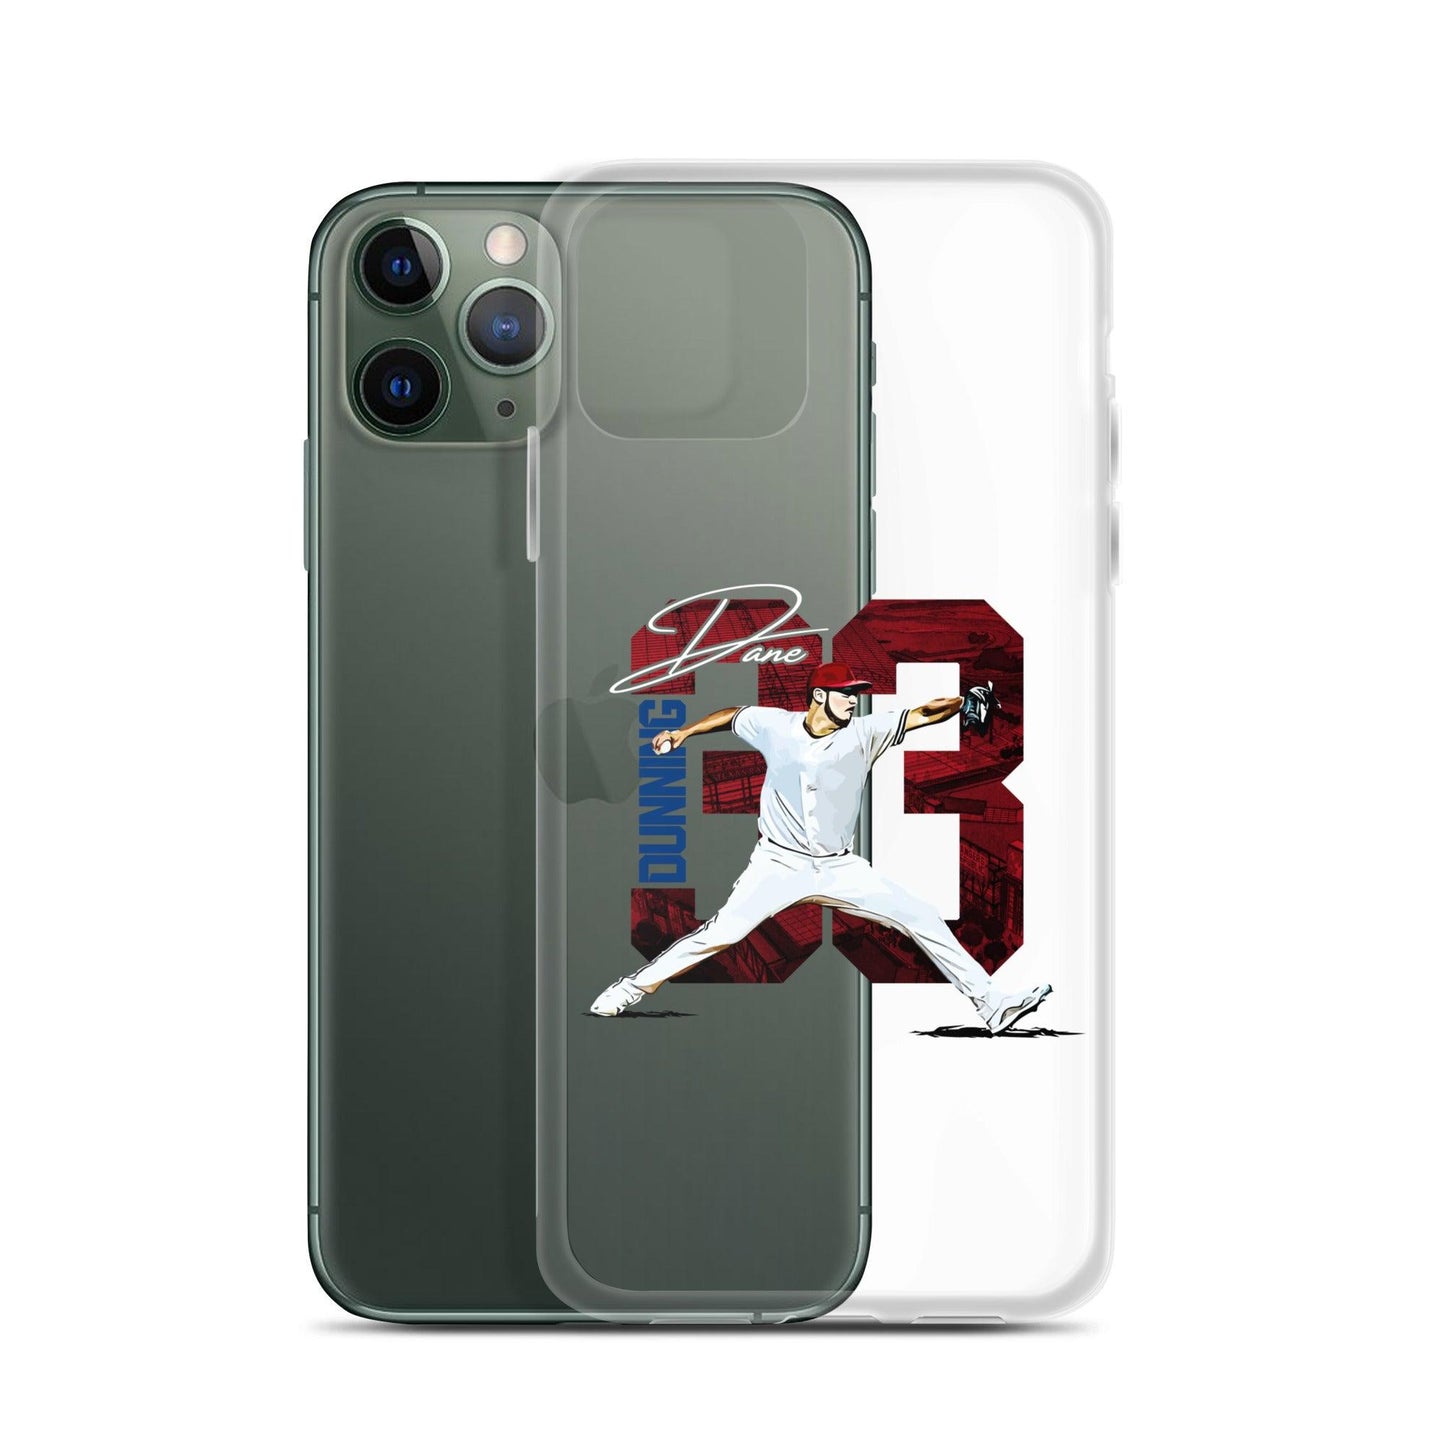 Dane Dunning "Strikeout" iPhone Case - Fan Arch